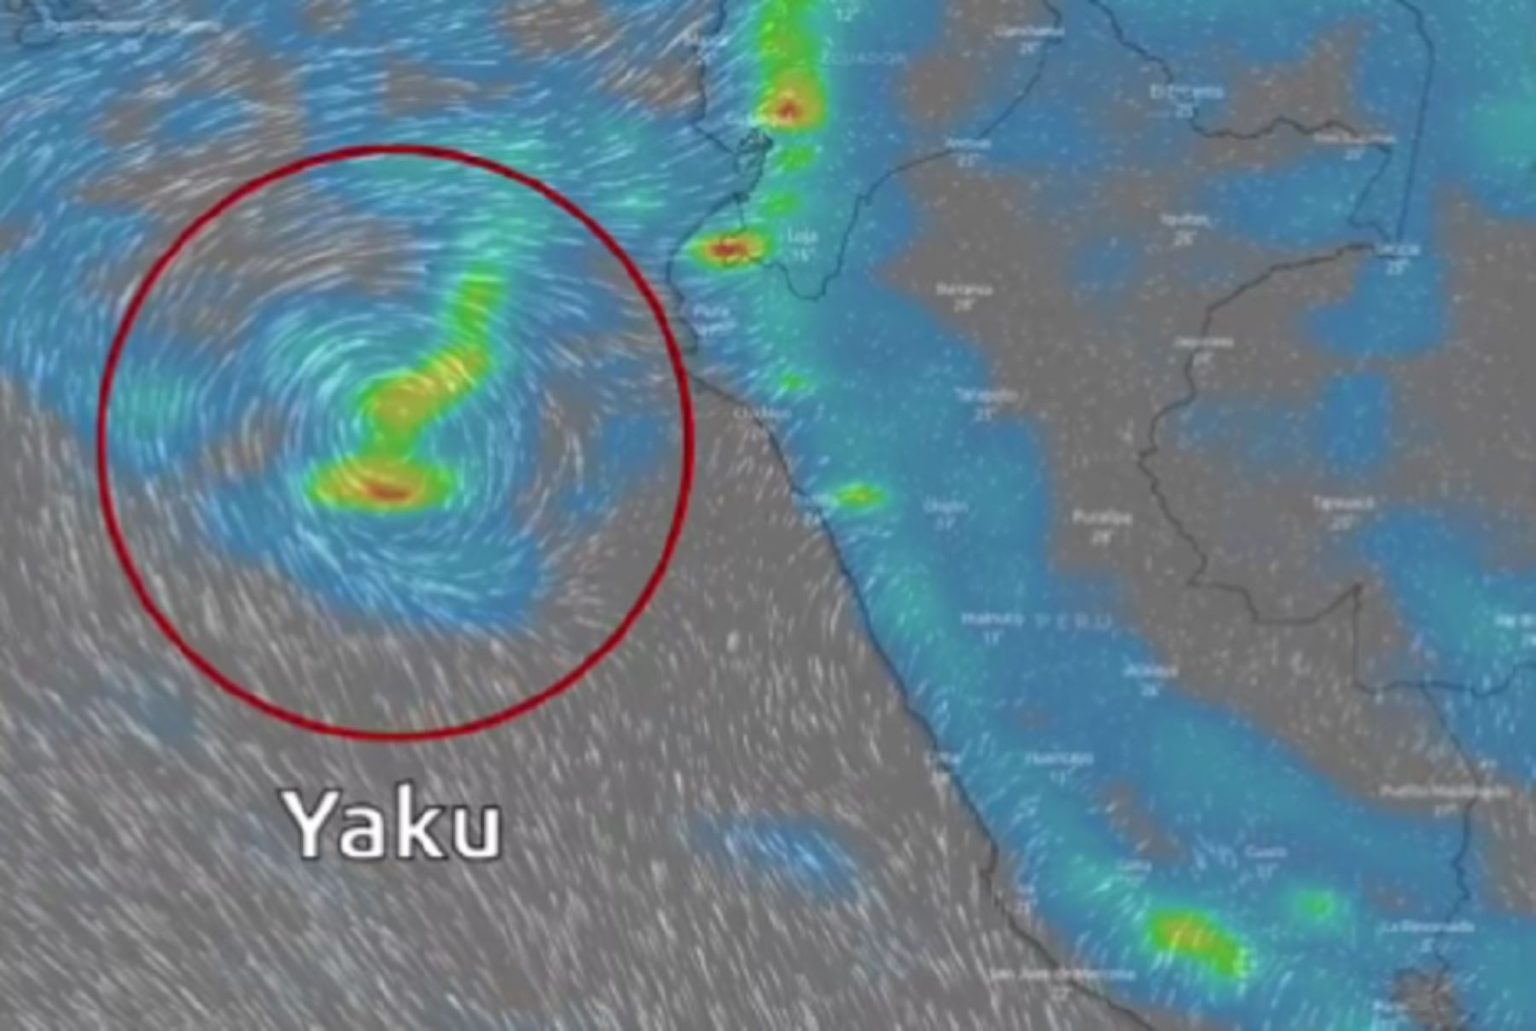 What is the Yaku Cyclone and why is it affecting Peru so devastatingly?